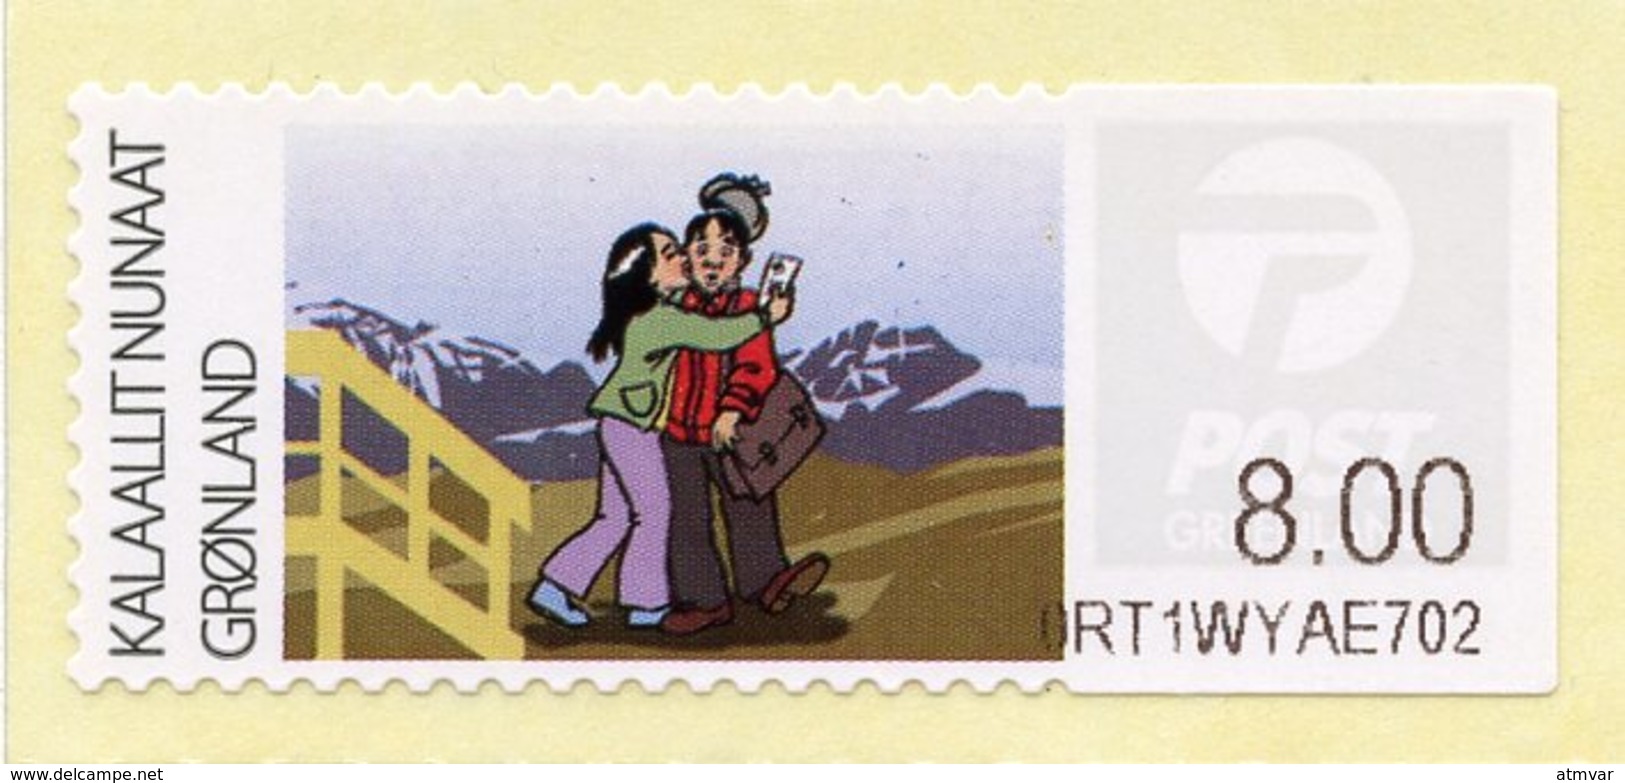 GREENLAND / GROENLAND (2009) - ATM - Receiving A Letter, Post, Postmen, Delivery, Facteur - Distributori